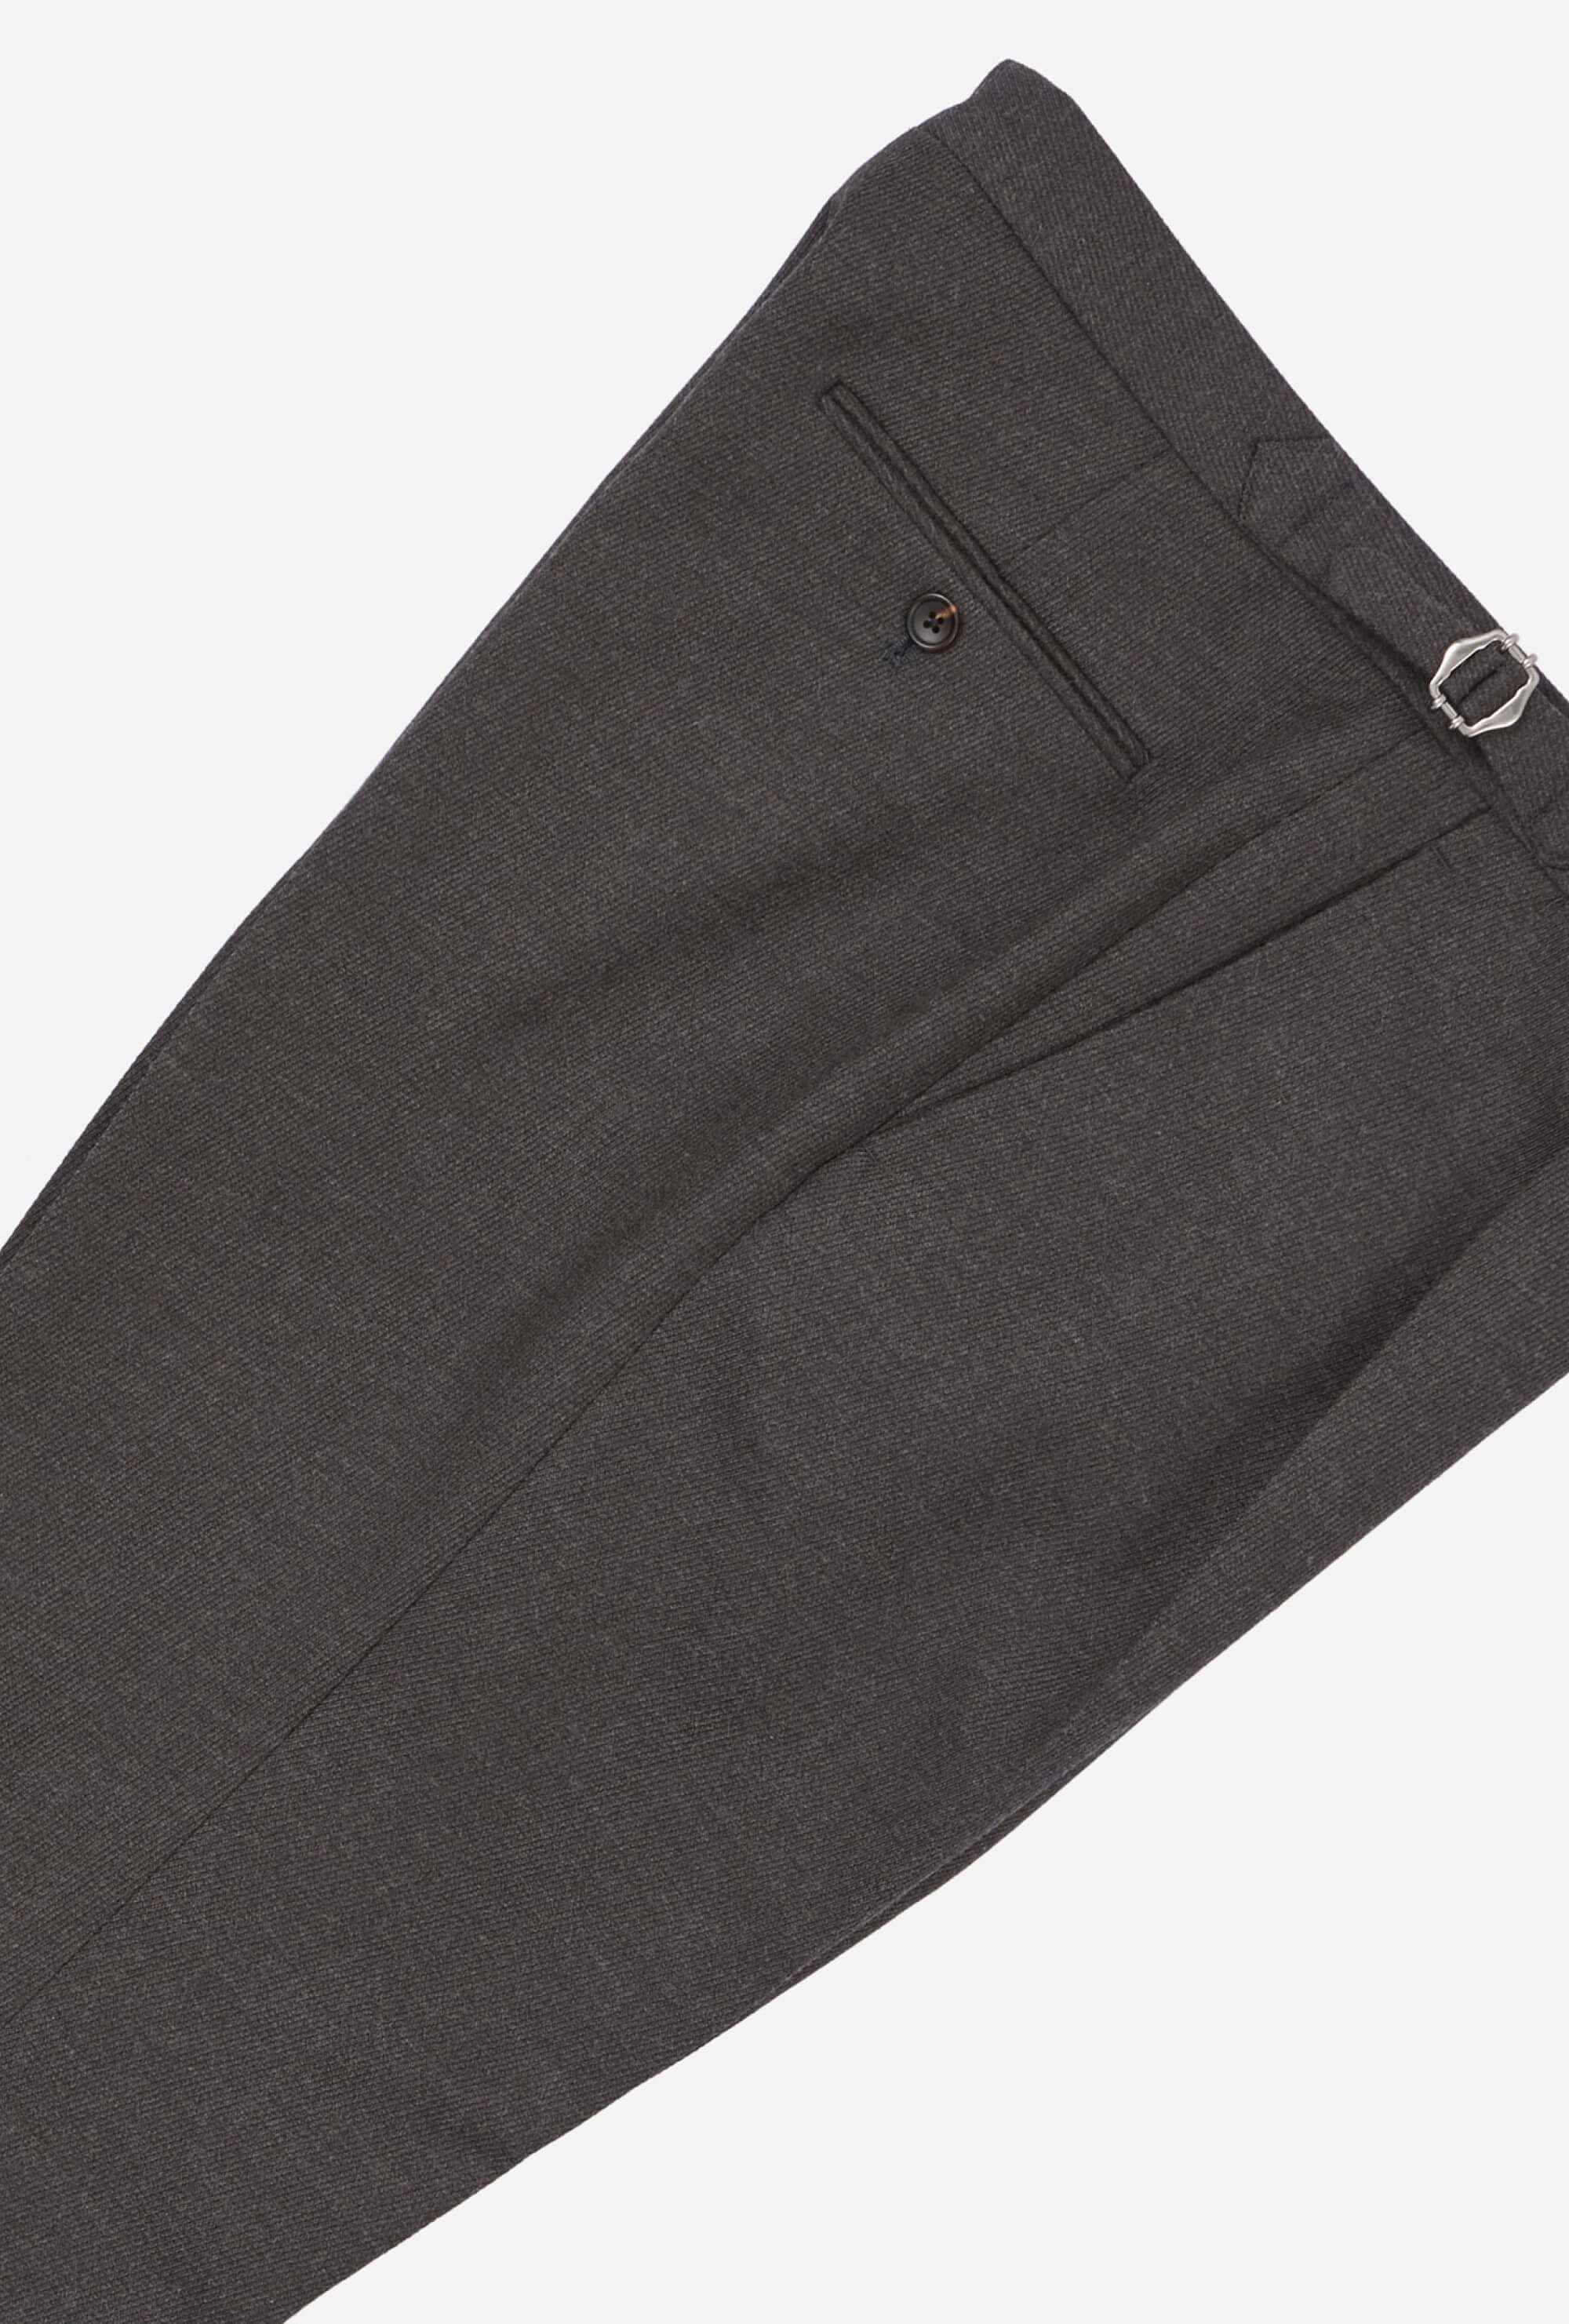 Tailored Trouser Brown Cavalry Twill